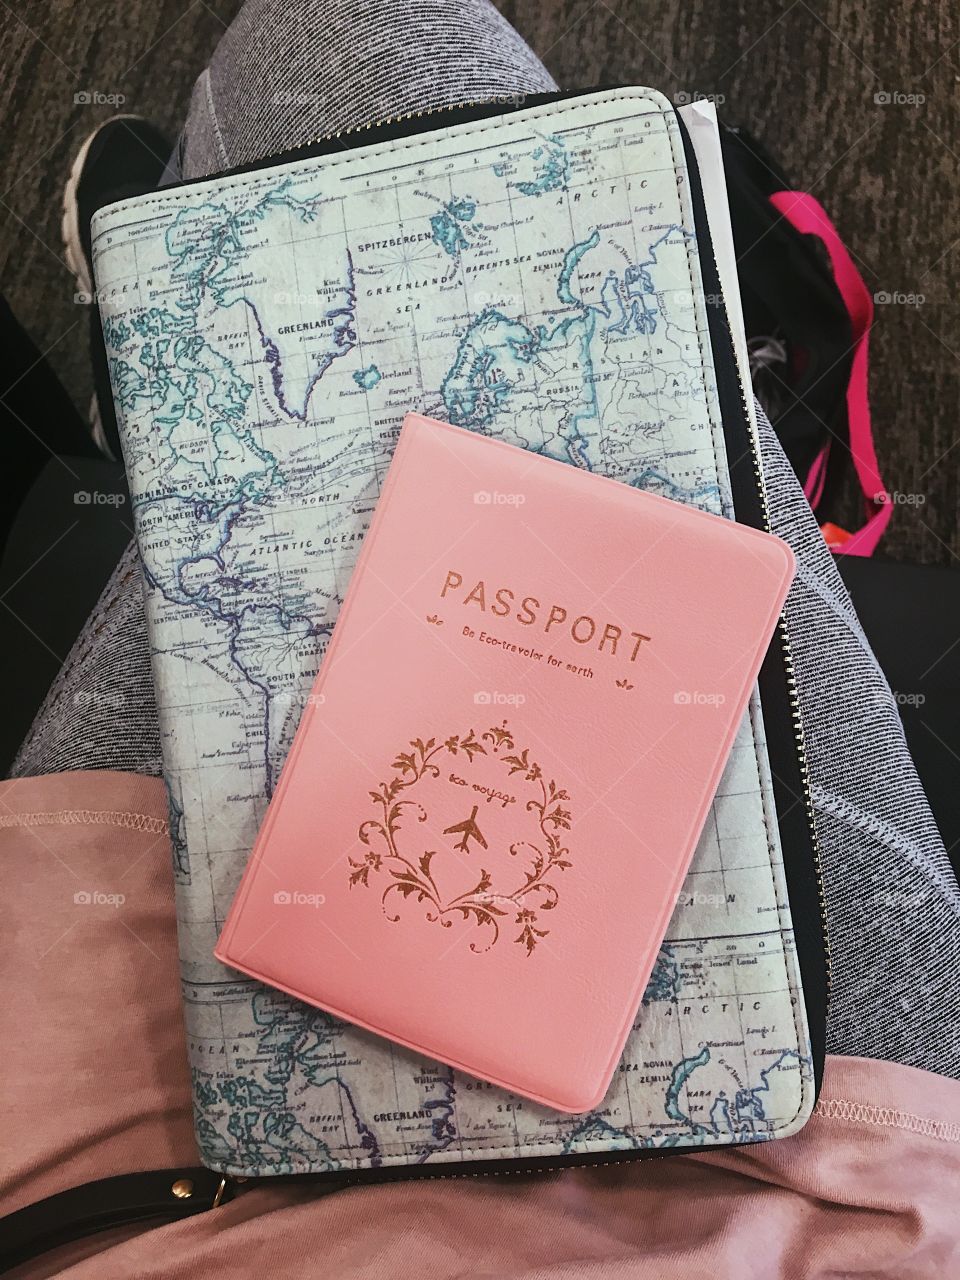 Travel passport cover in airport